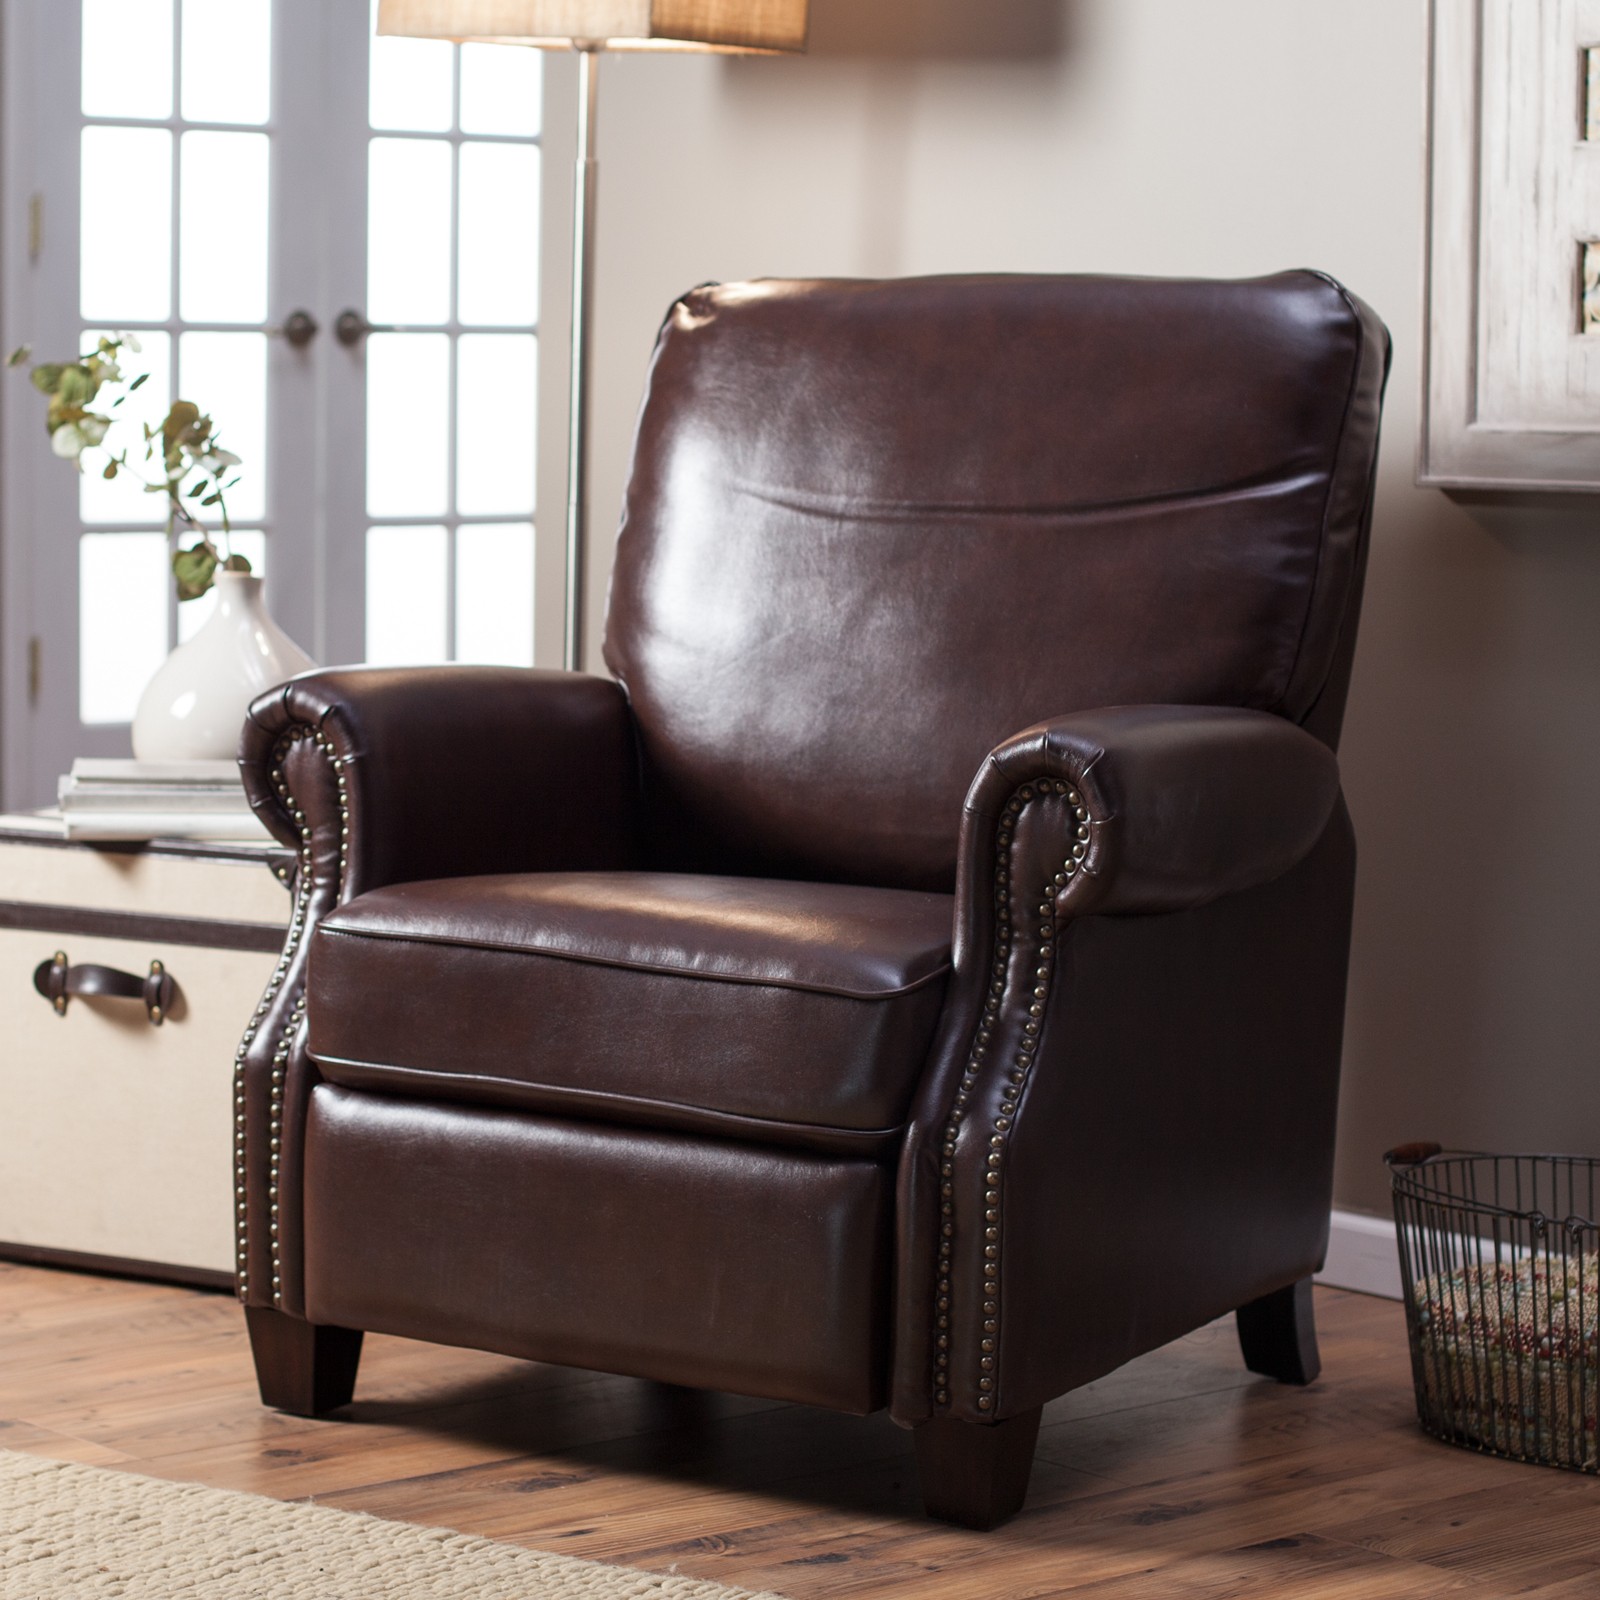 Barcalounger ridley ii leather recliner with nailheads